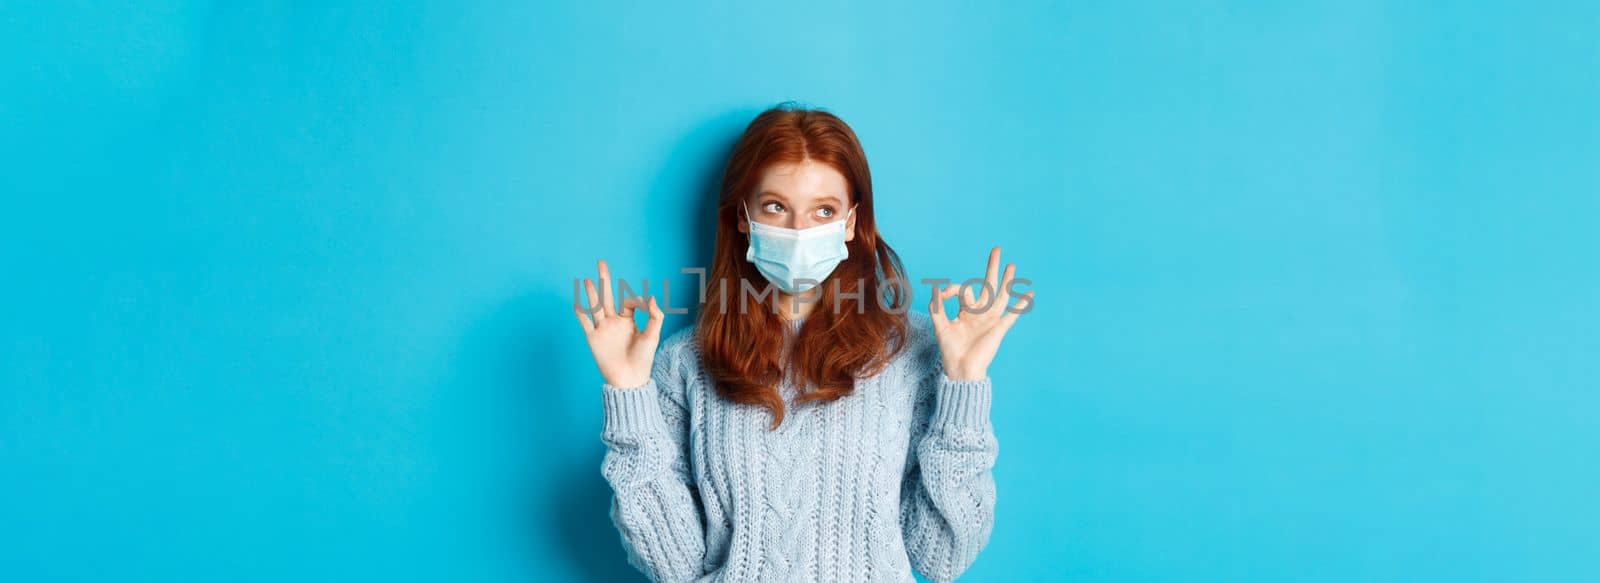 Winter, covid-19 and social distancing concept. Satisfied young redhead woman in face mask showing alright, okay gestures and looking left at promo, blue background.